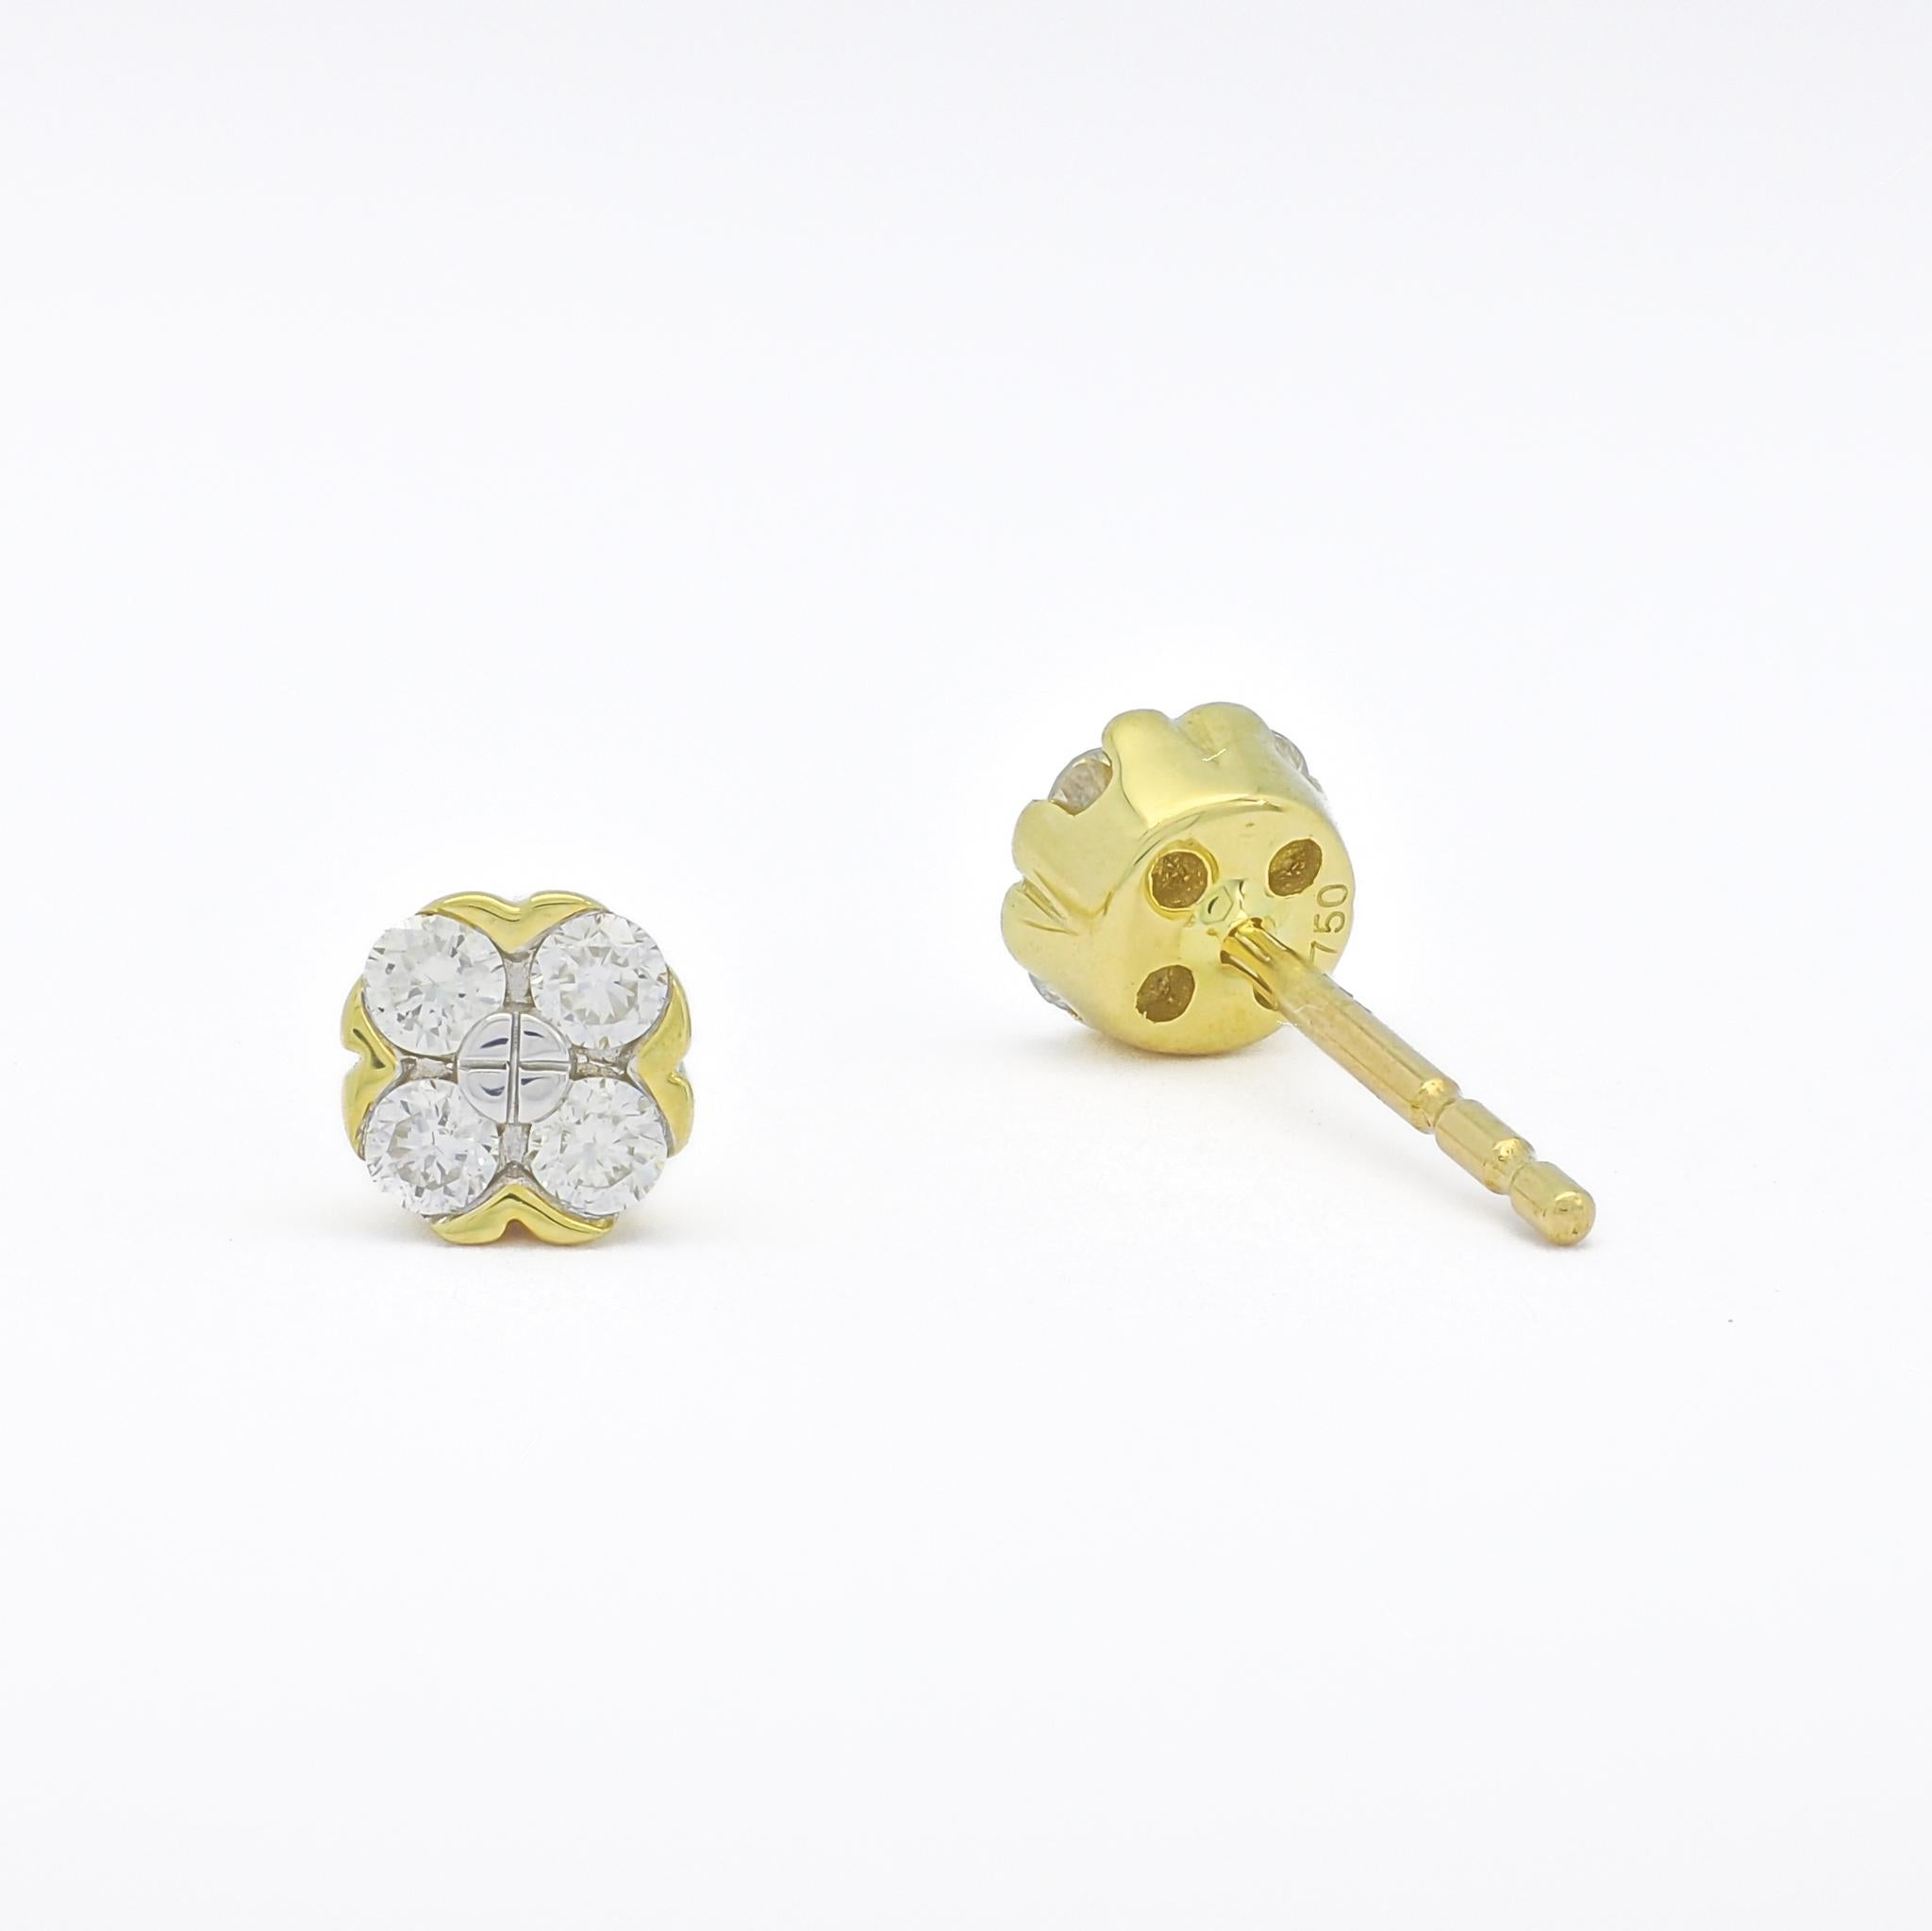 Crafted with meticulous attention to detail, each earring features a mesmerizing arrangement of glistening diamonds set in a bezel flower setting, radiating timeless charm and grace.

The simplicity of the flower shape design adds a touch of whimsy